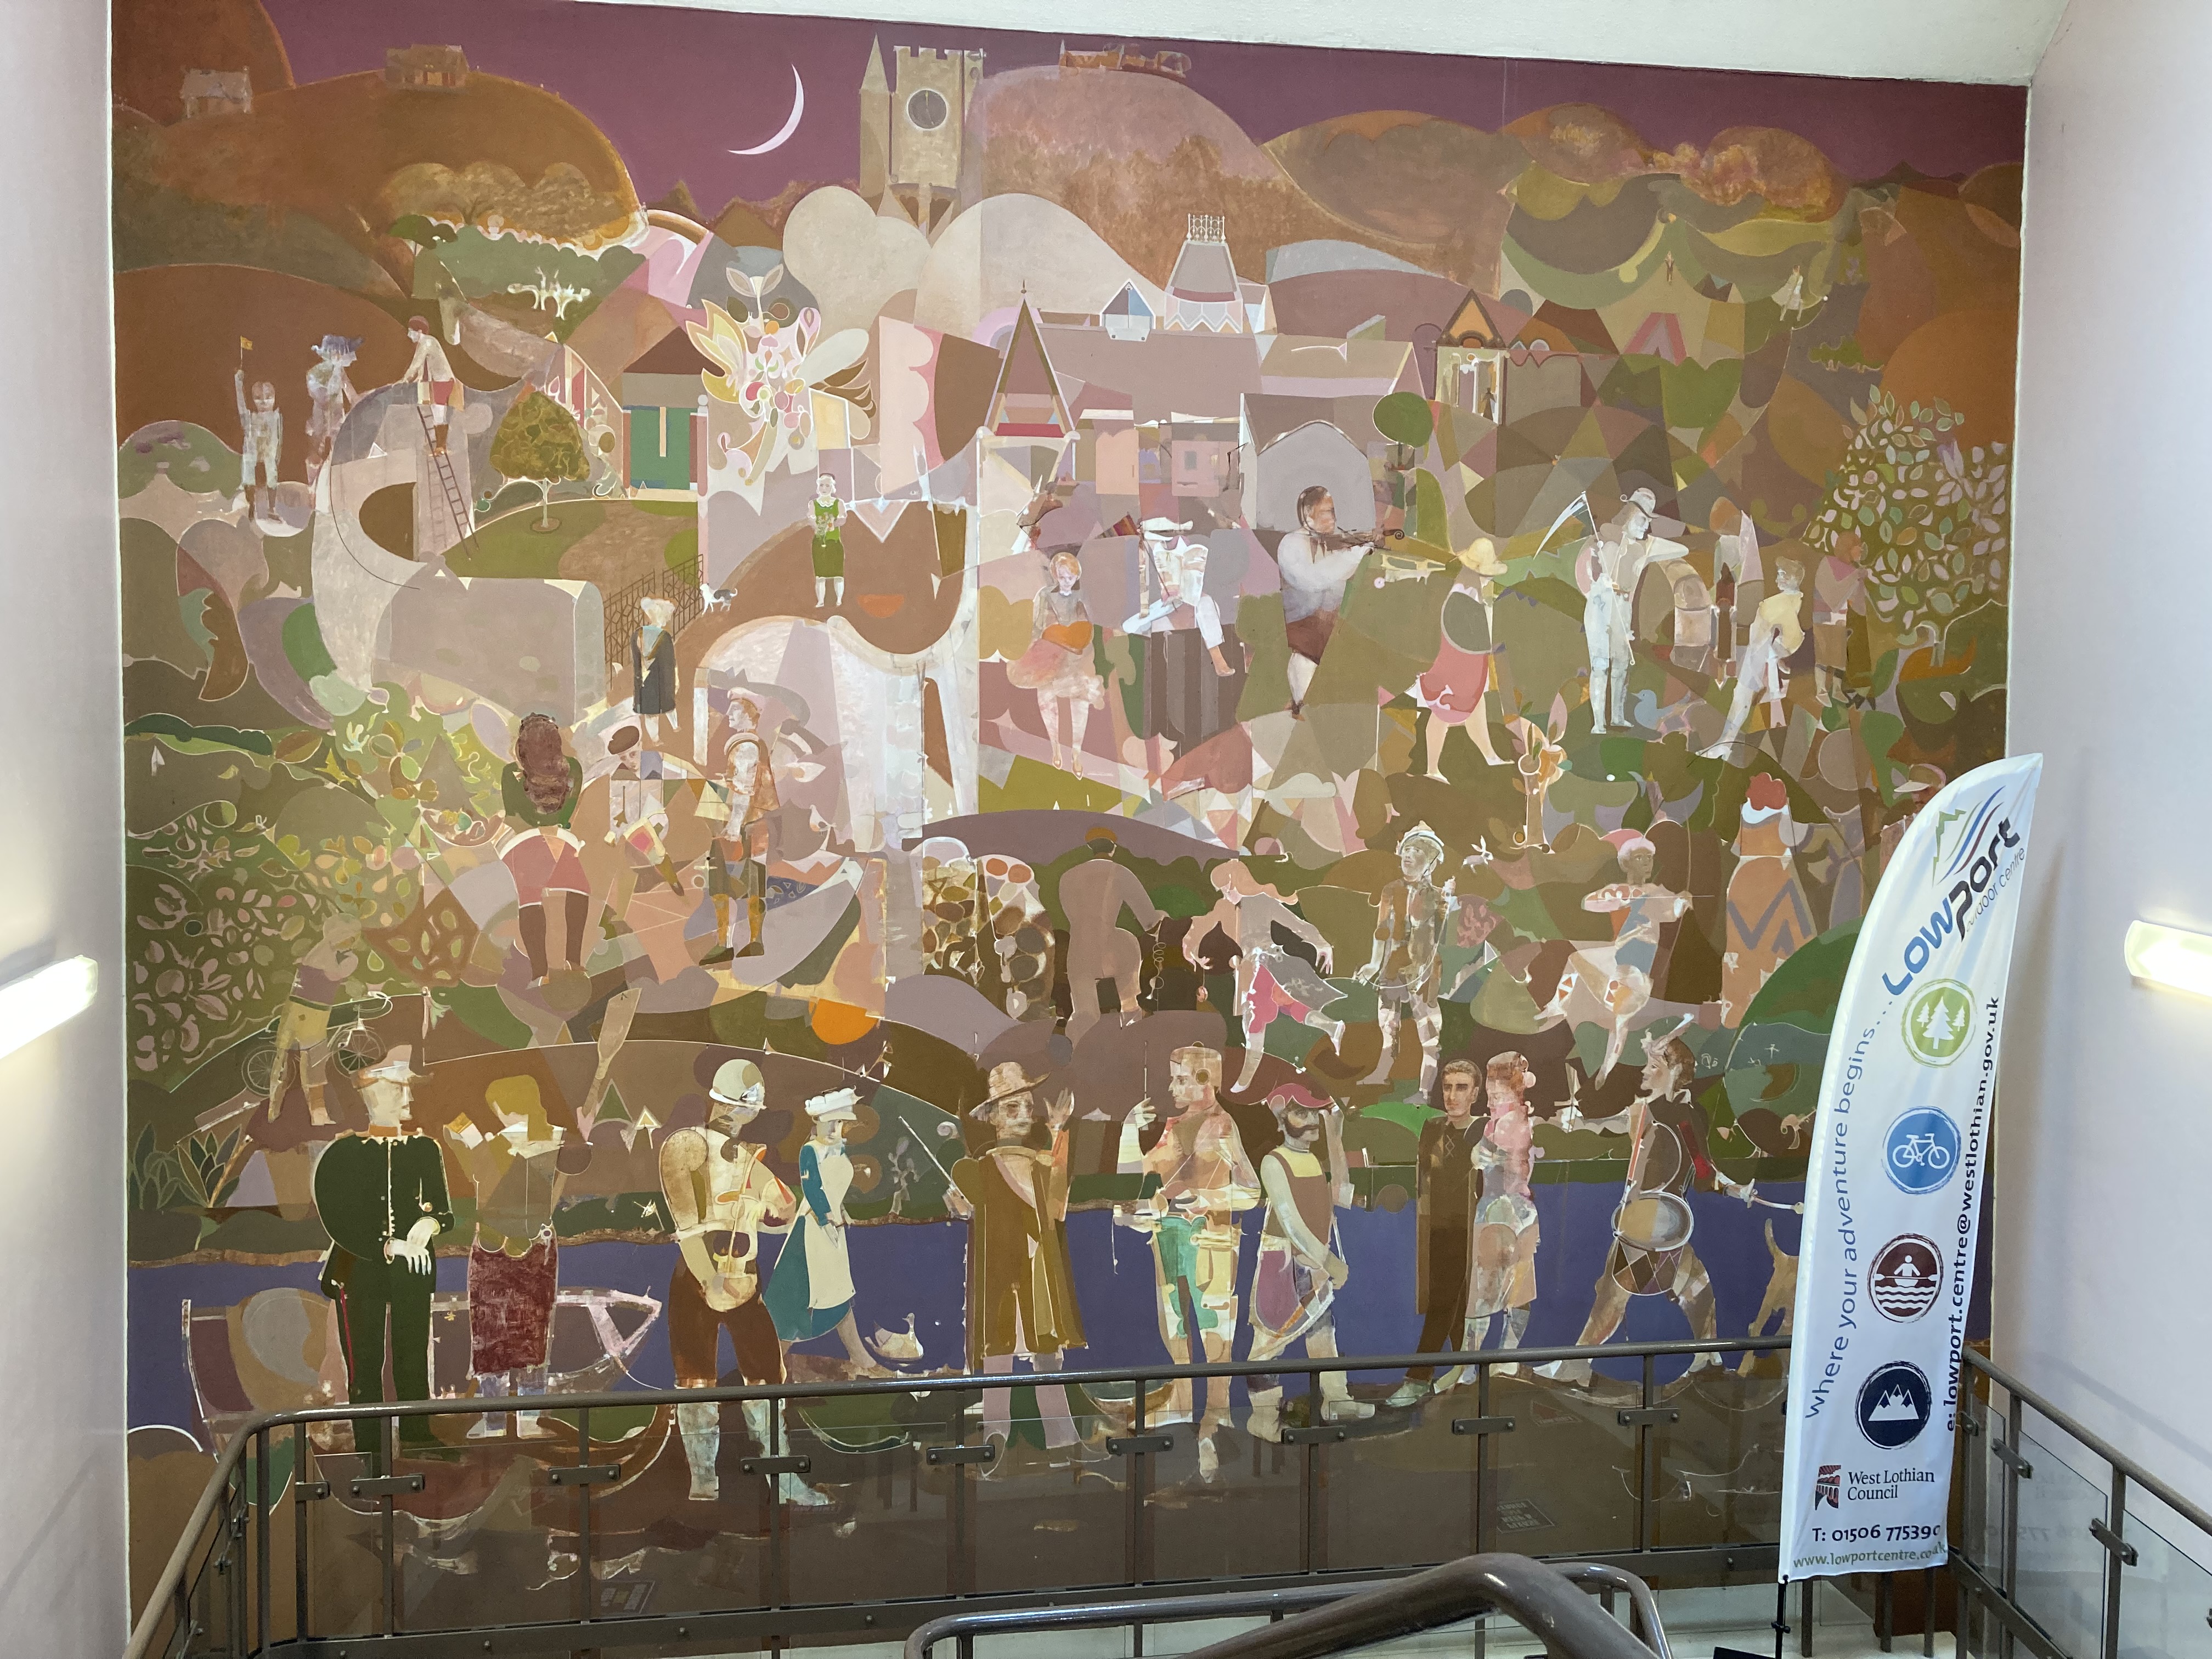 Colourful wall mural inside building showing people, buildings, hills, purple sky